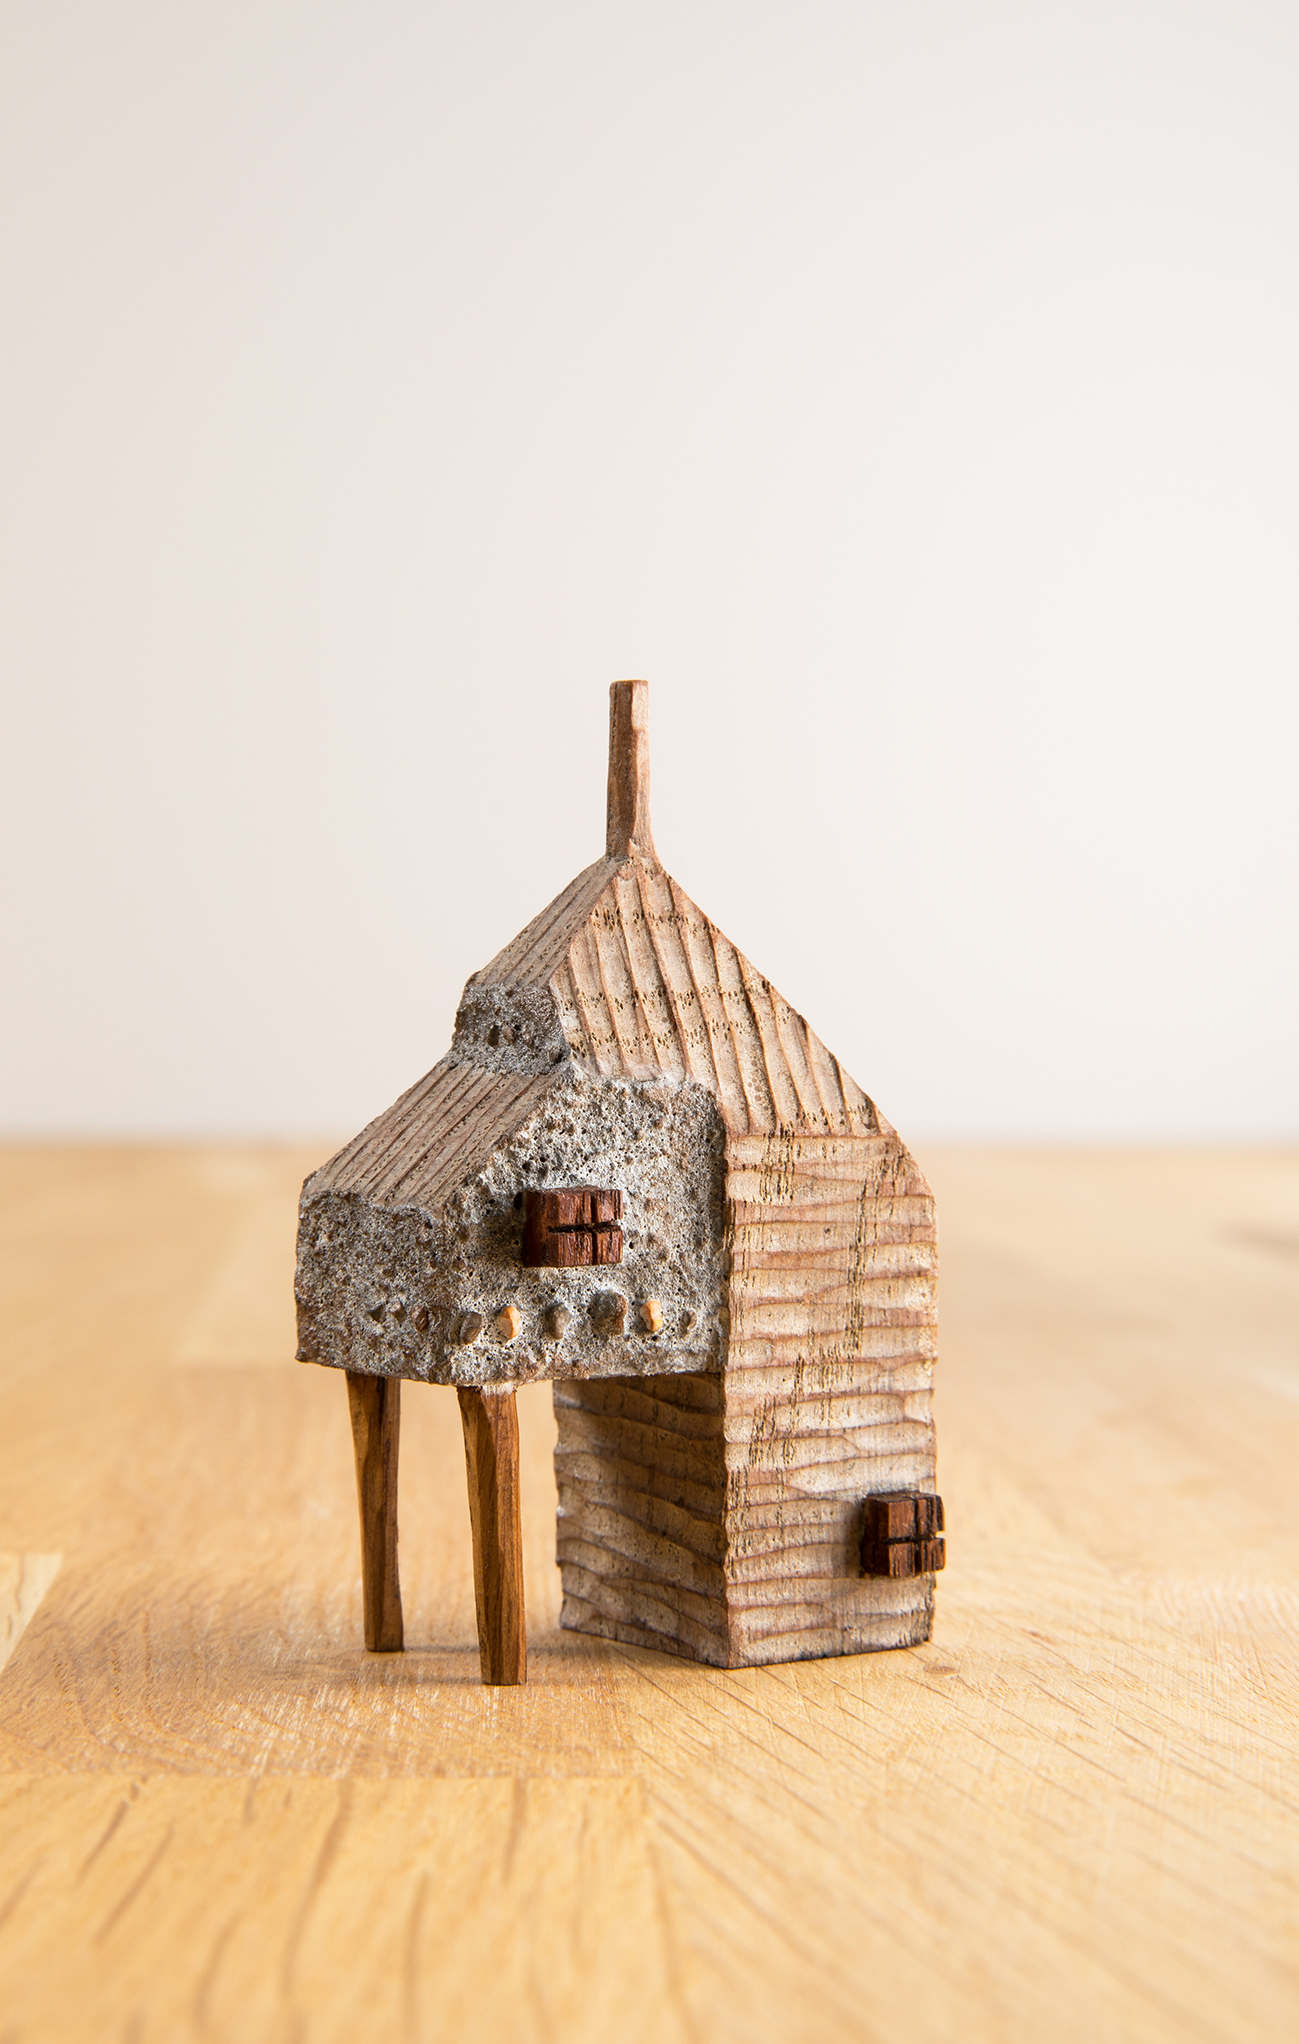 A miniature carved wooden house